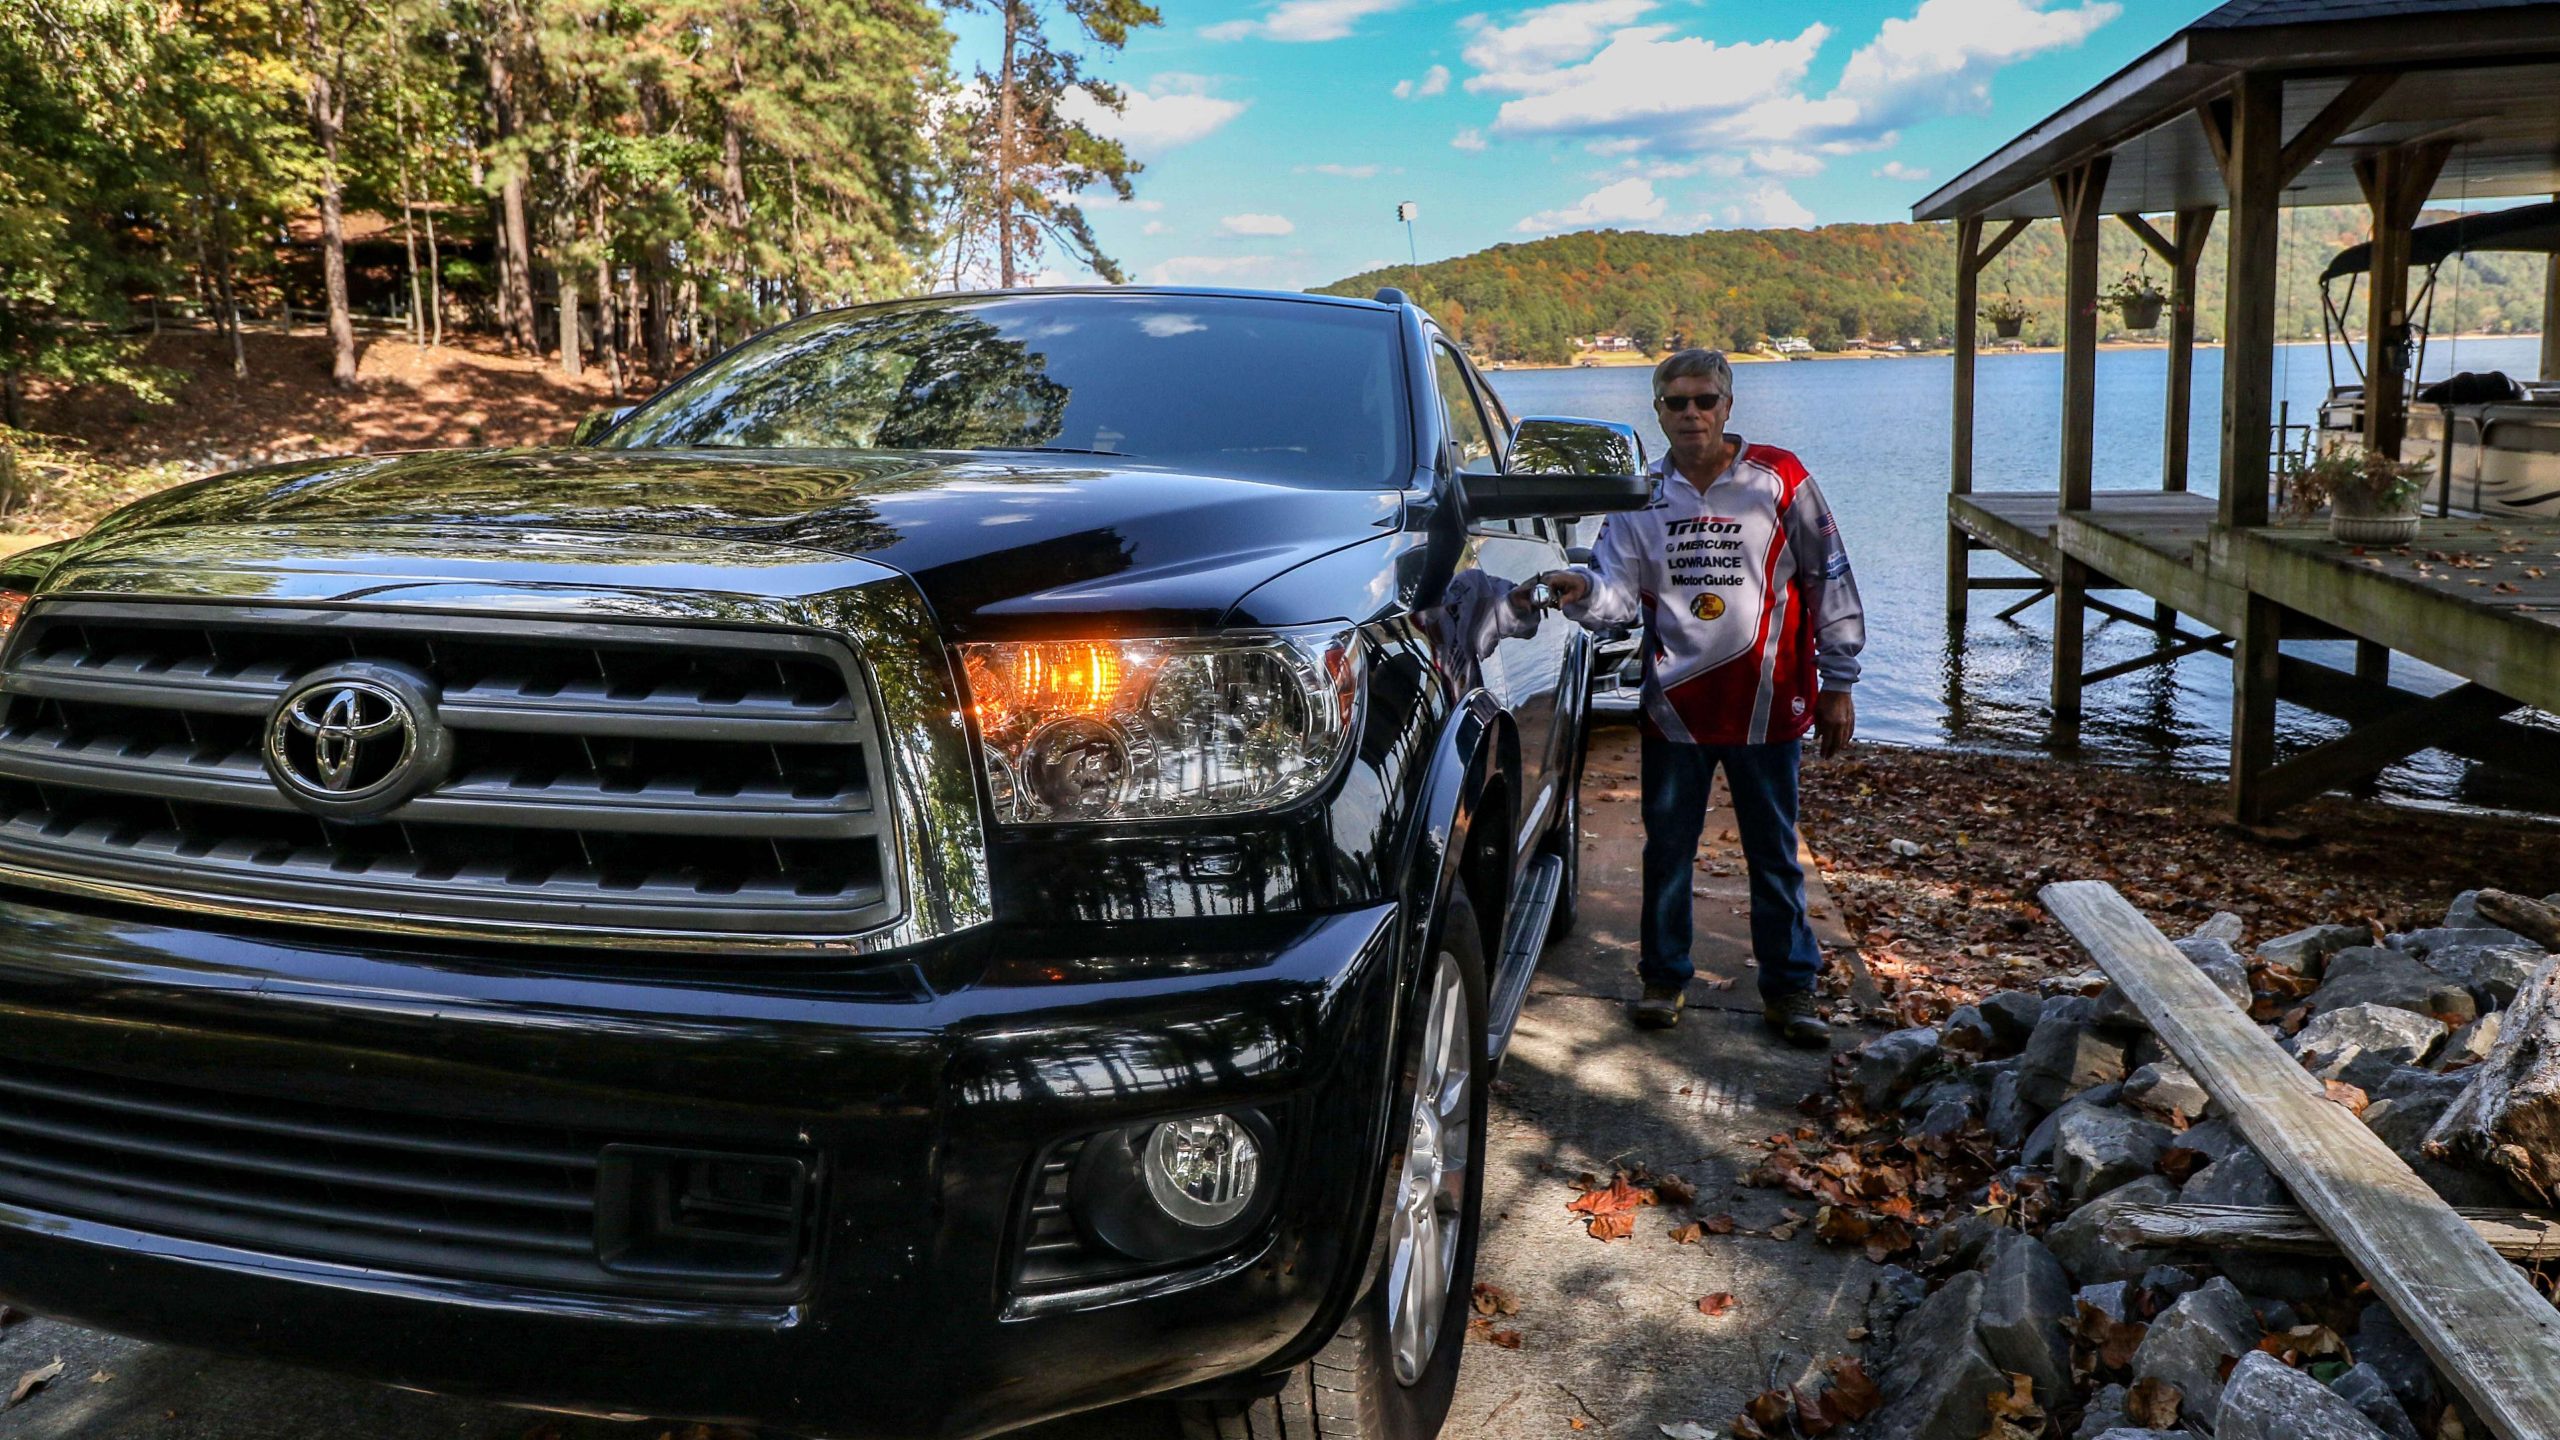 The B.A.S.S. Nation angler and #ToyotaBonusBucks participant owns two Toyotas.  